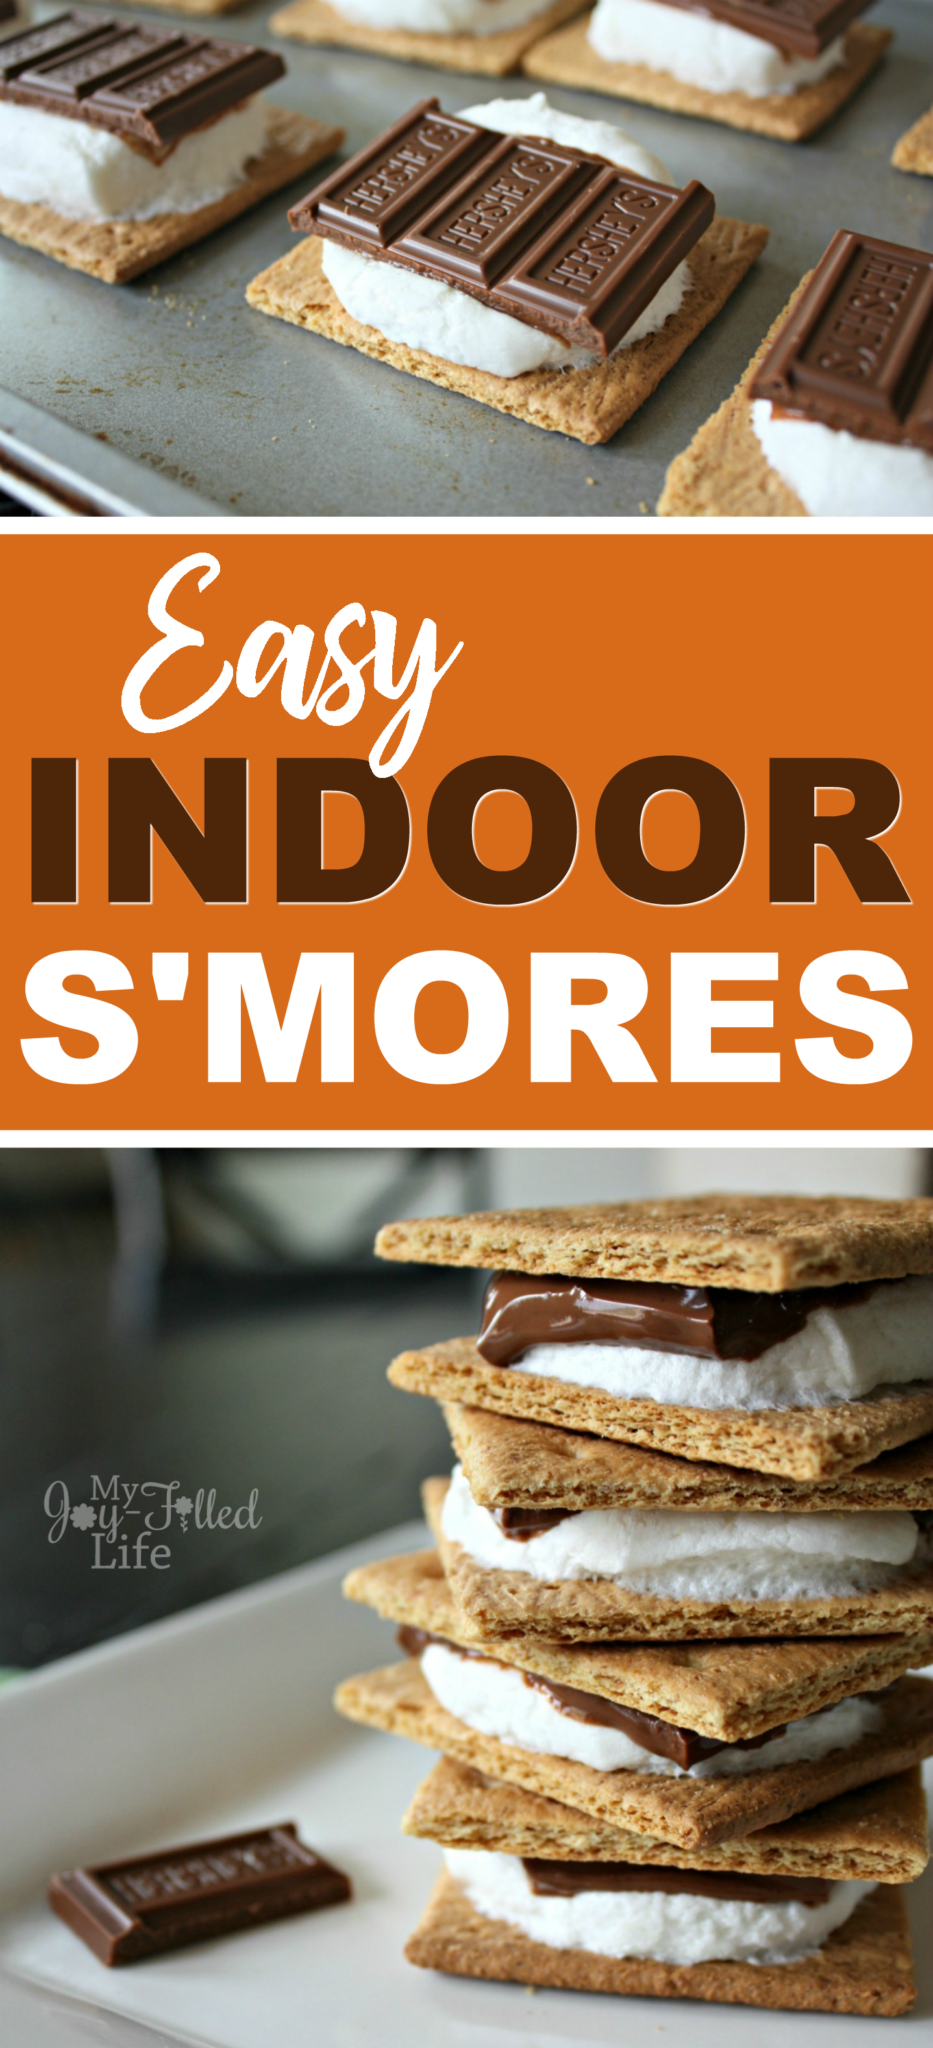 Enjoy s'mores anytime of year by making them inside! Check out how easy it is to make s'mores in the oven. They turn out better than making them the old-fashioned way. 